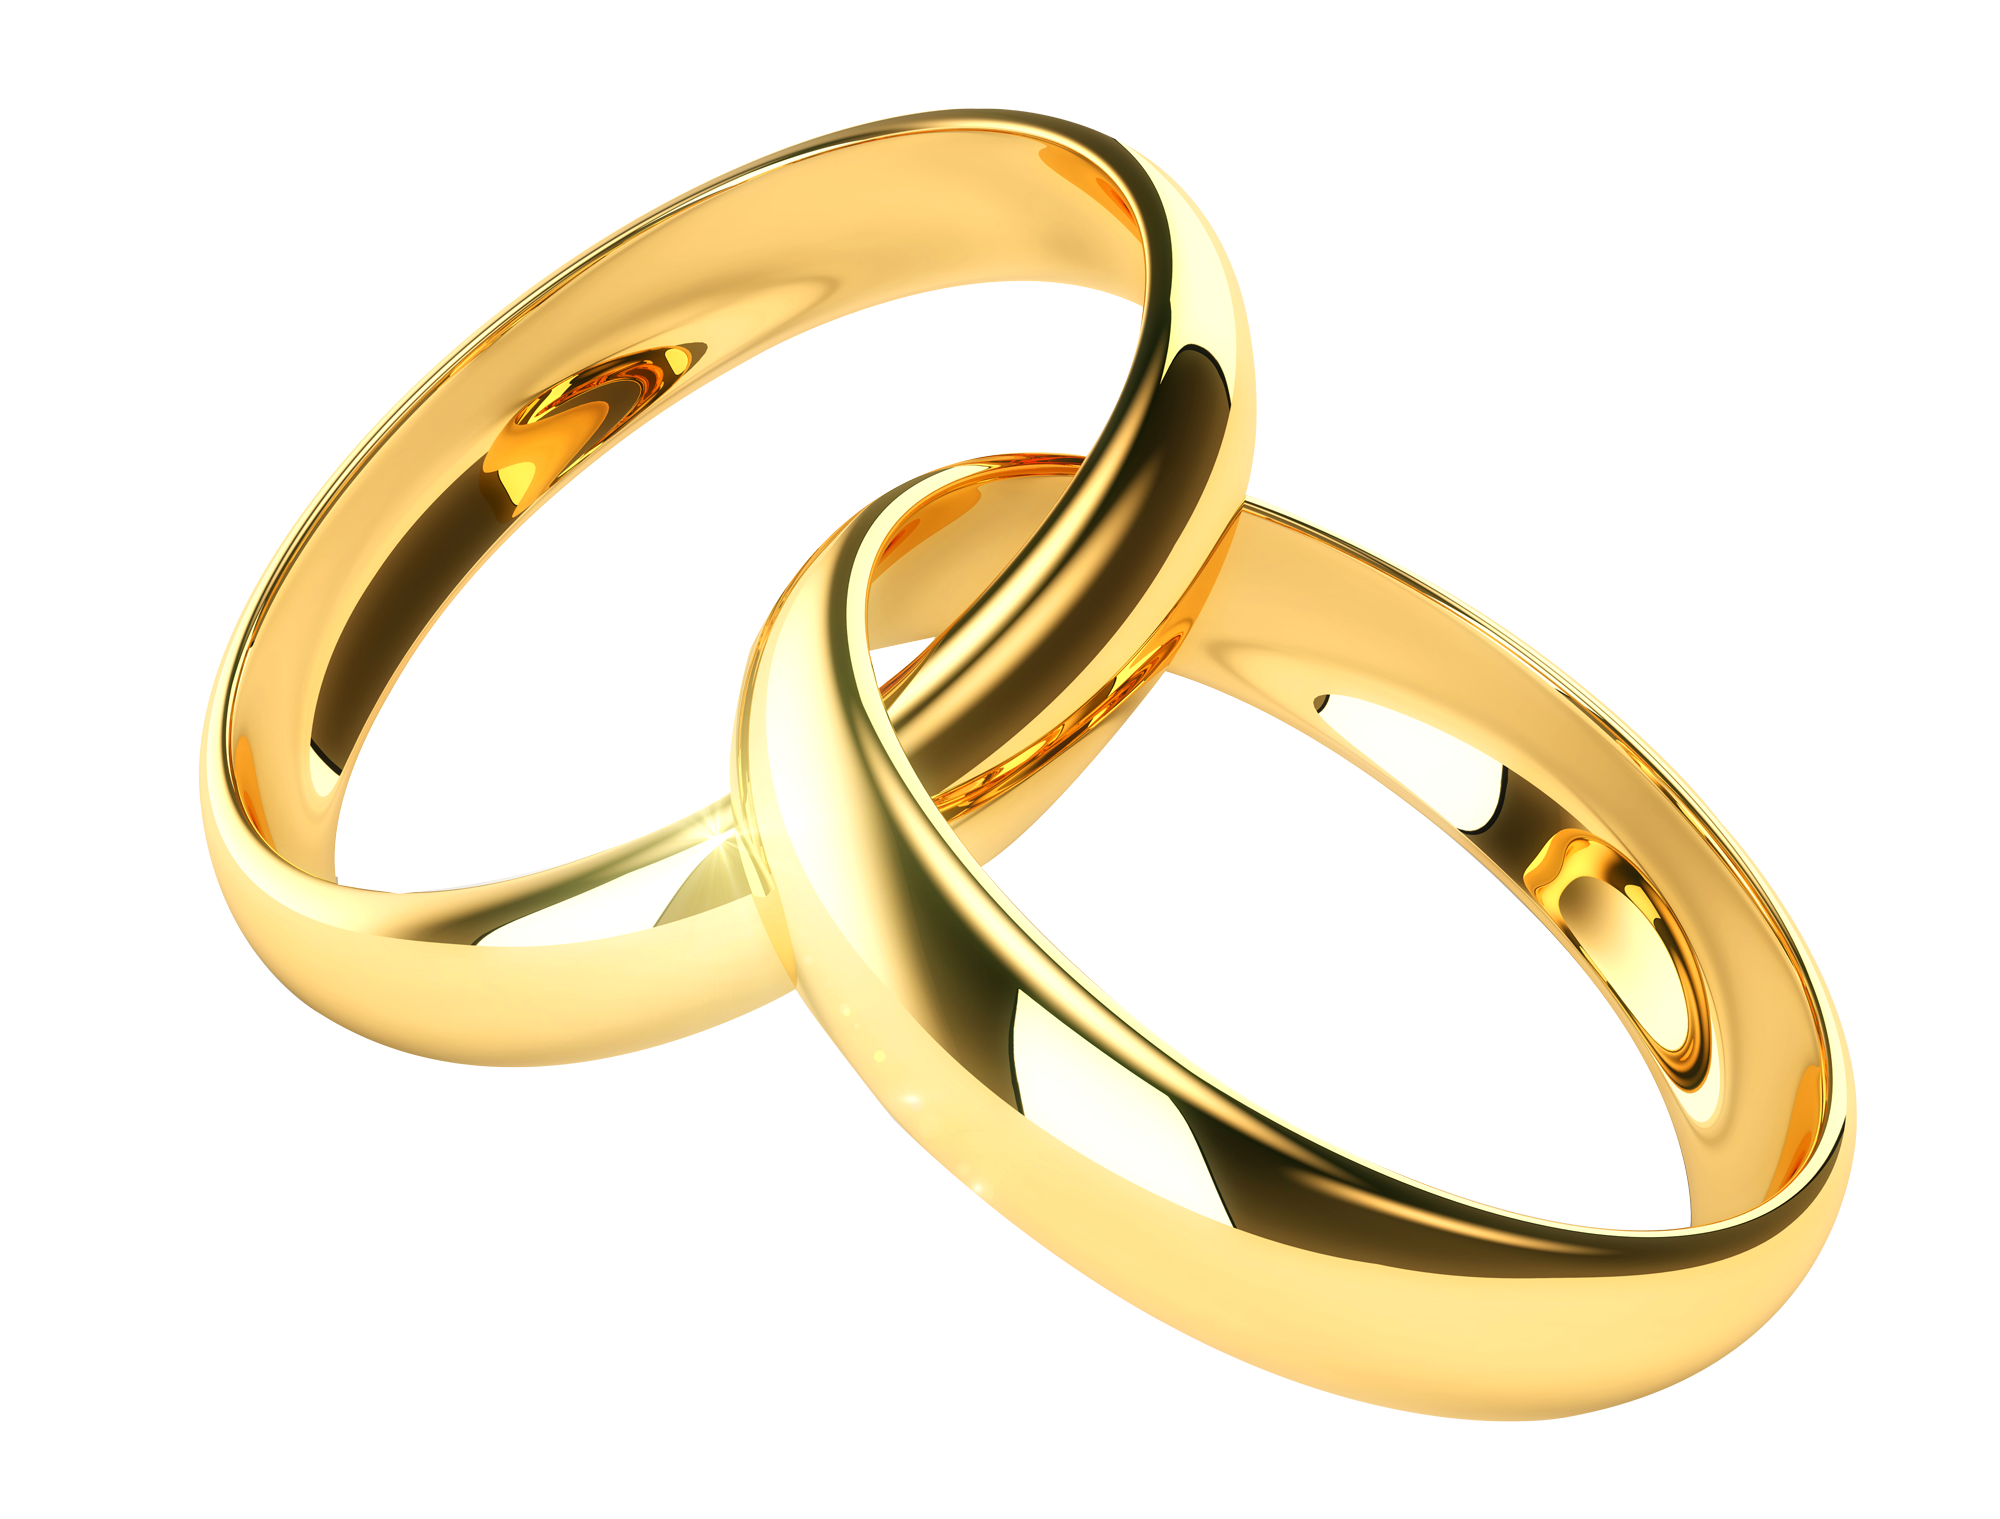 ring png image by @stucknsilence 